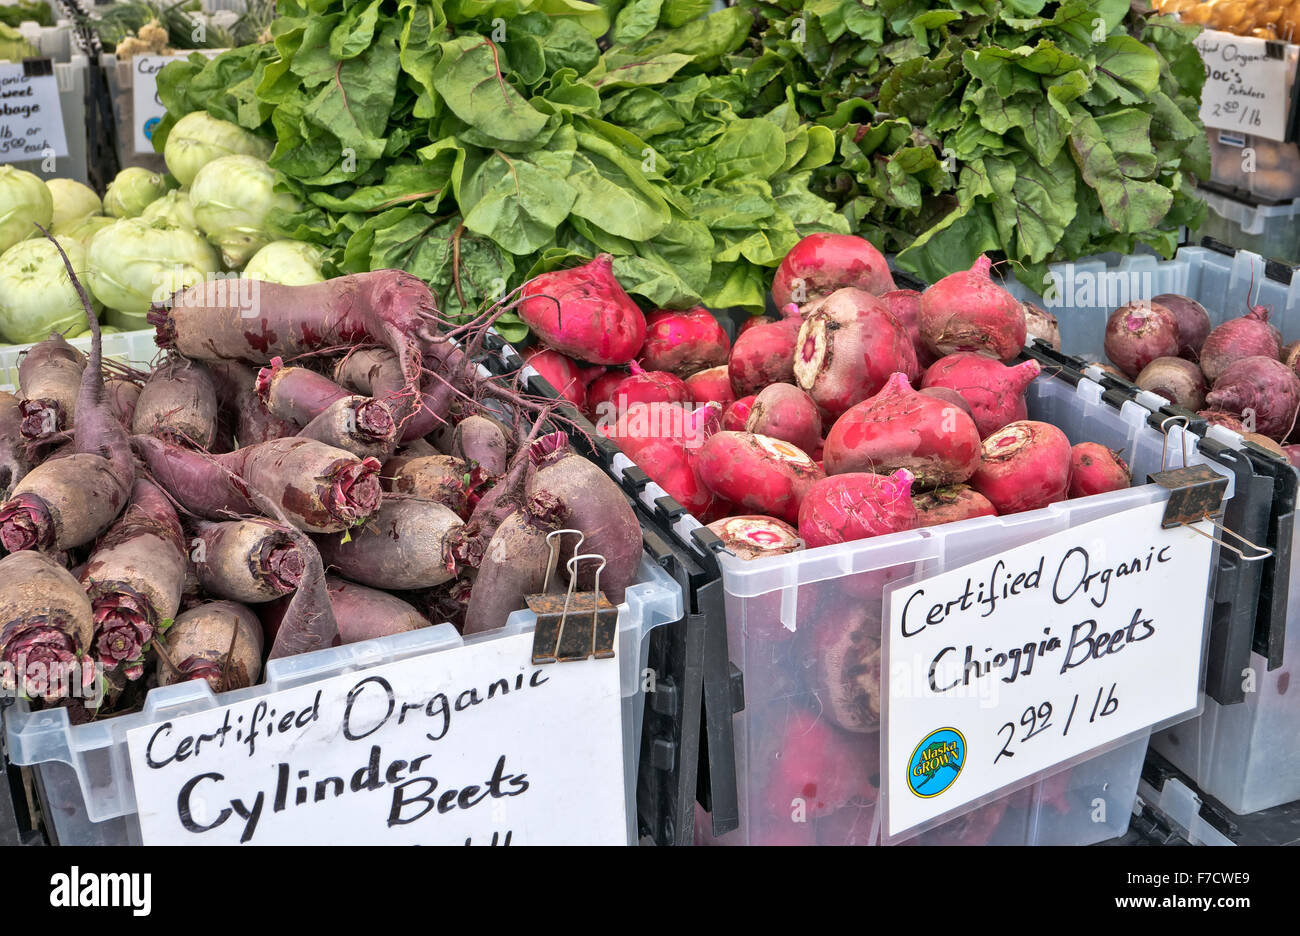 Organic Cylinder & Chioggia beets, South Anchorage Farmer's Market. Stock Photo